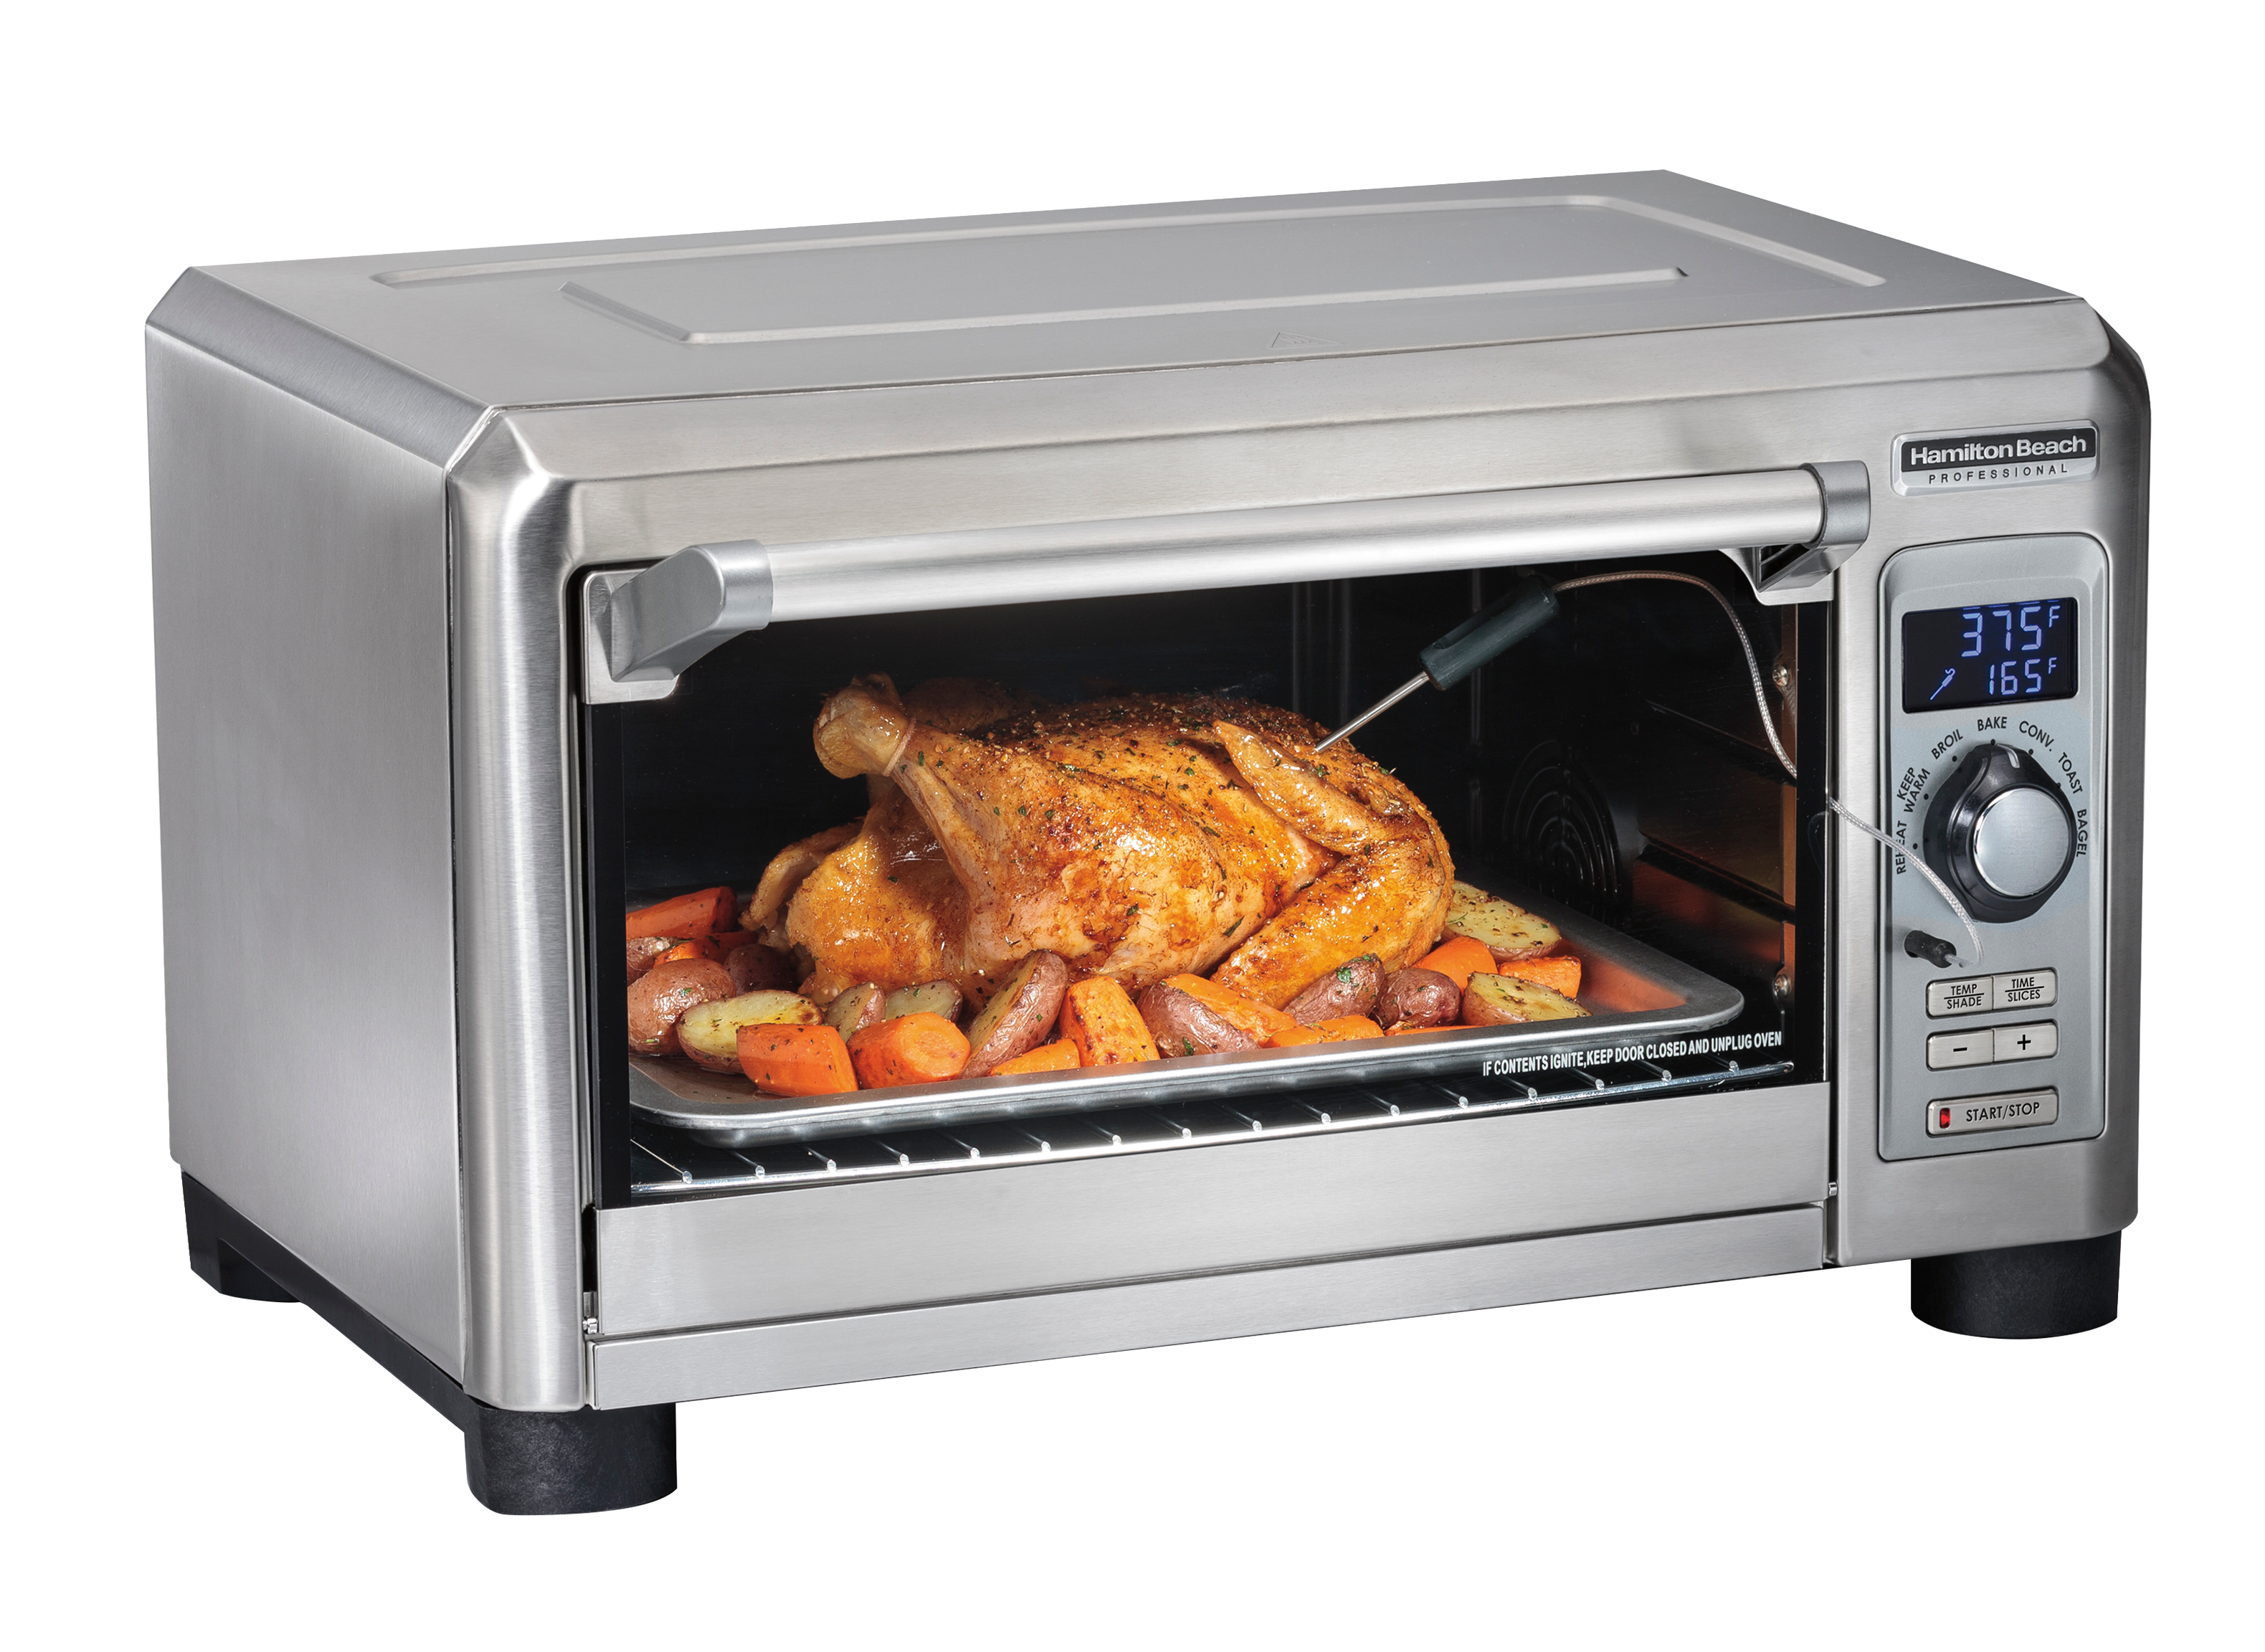 https://crdms.images.consumerreports.org/prod/products/cr/models/395997-toaster-ovens-hamilton-beach-professional-digital-31240-62096.png